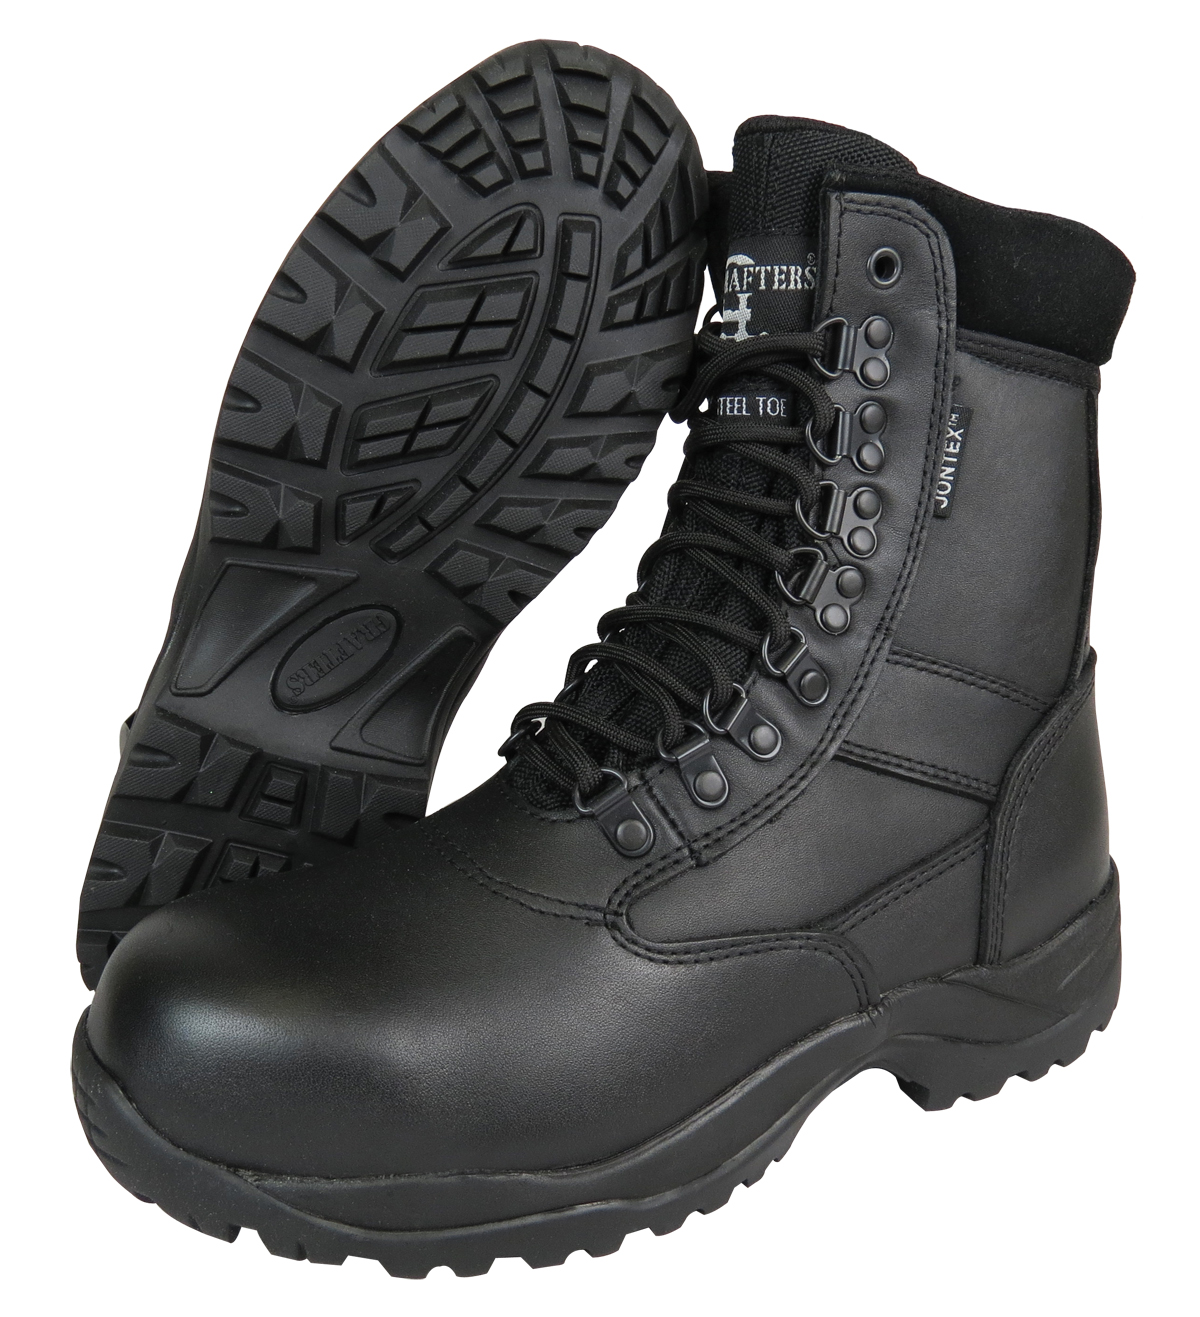 grafters boots uk